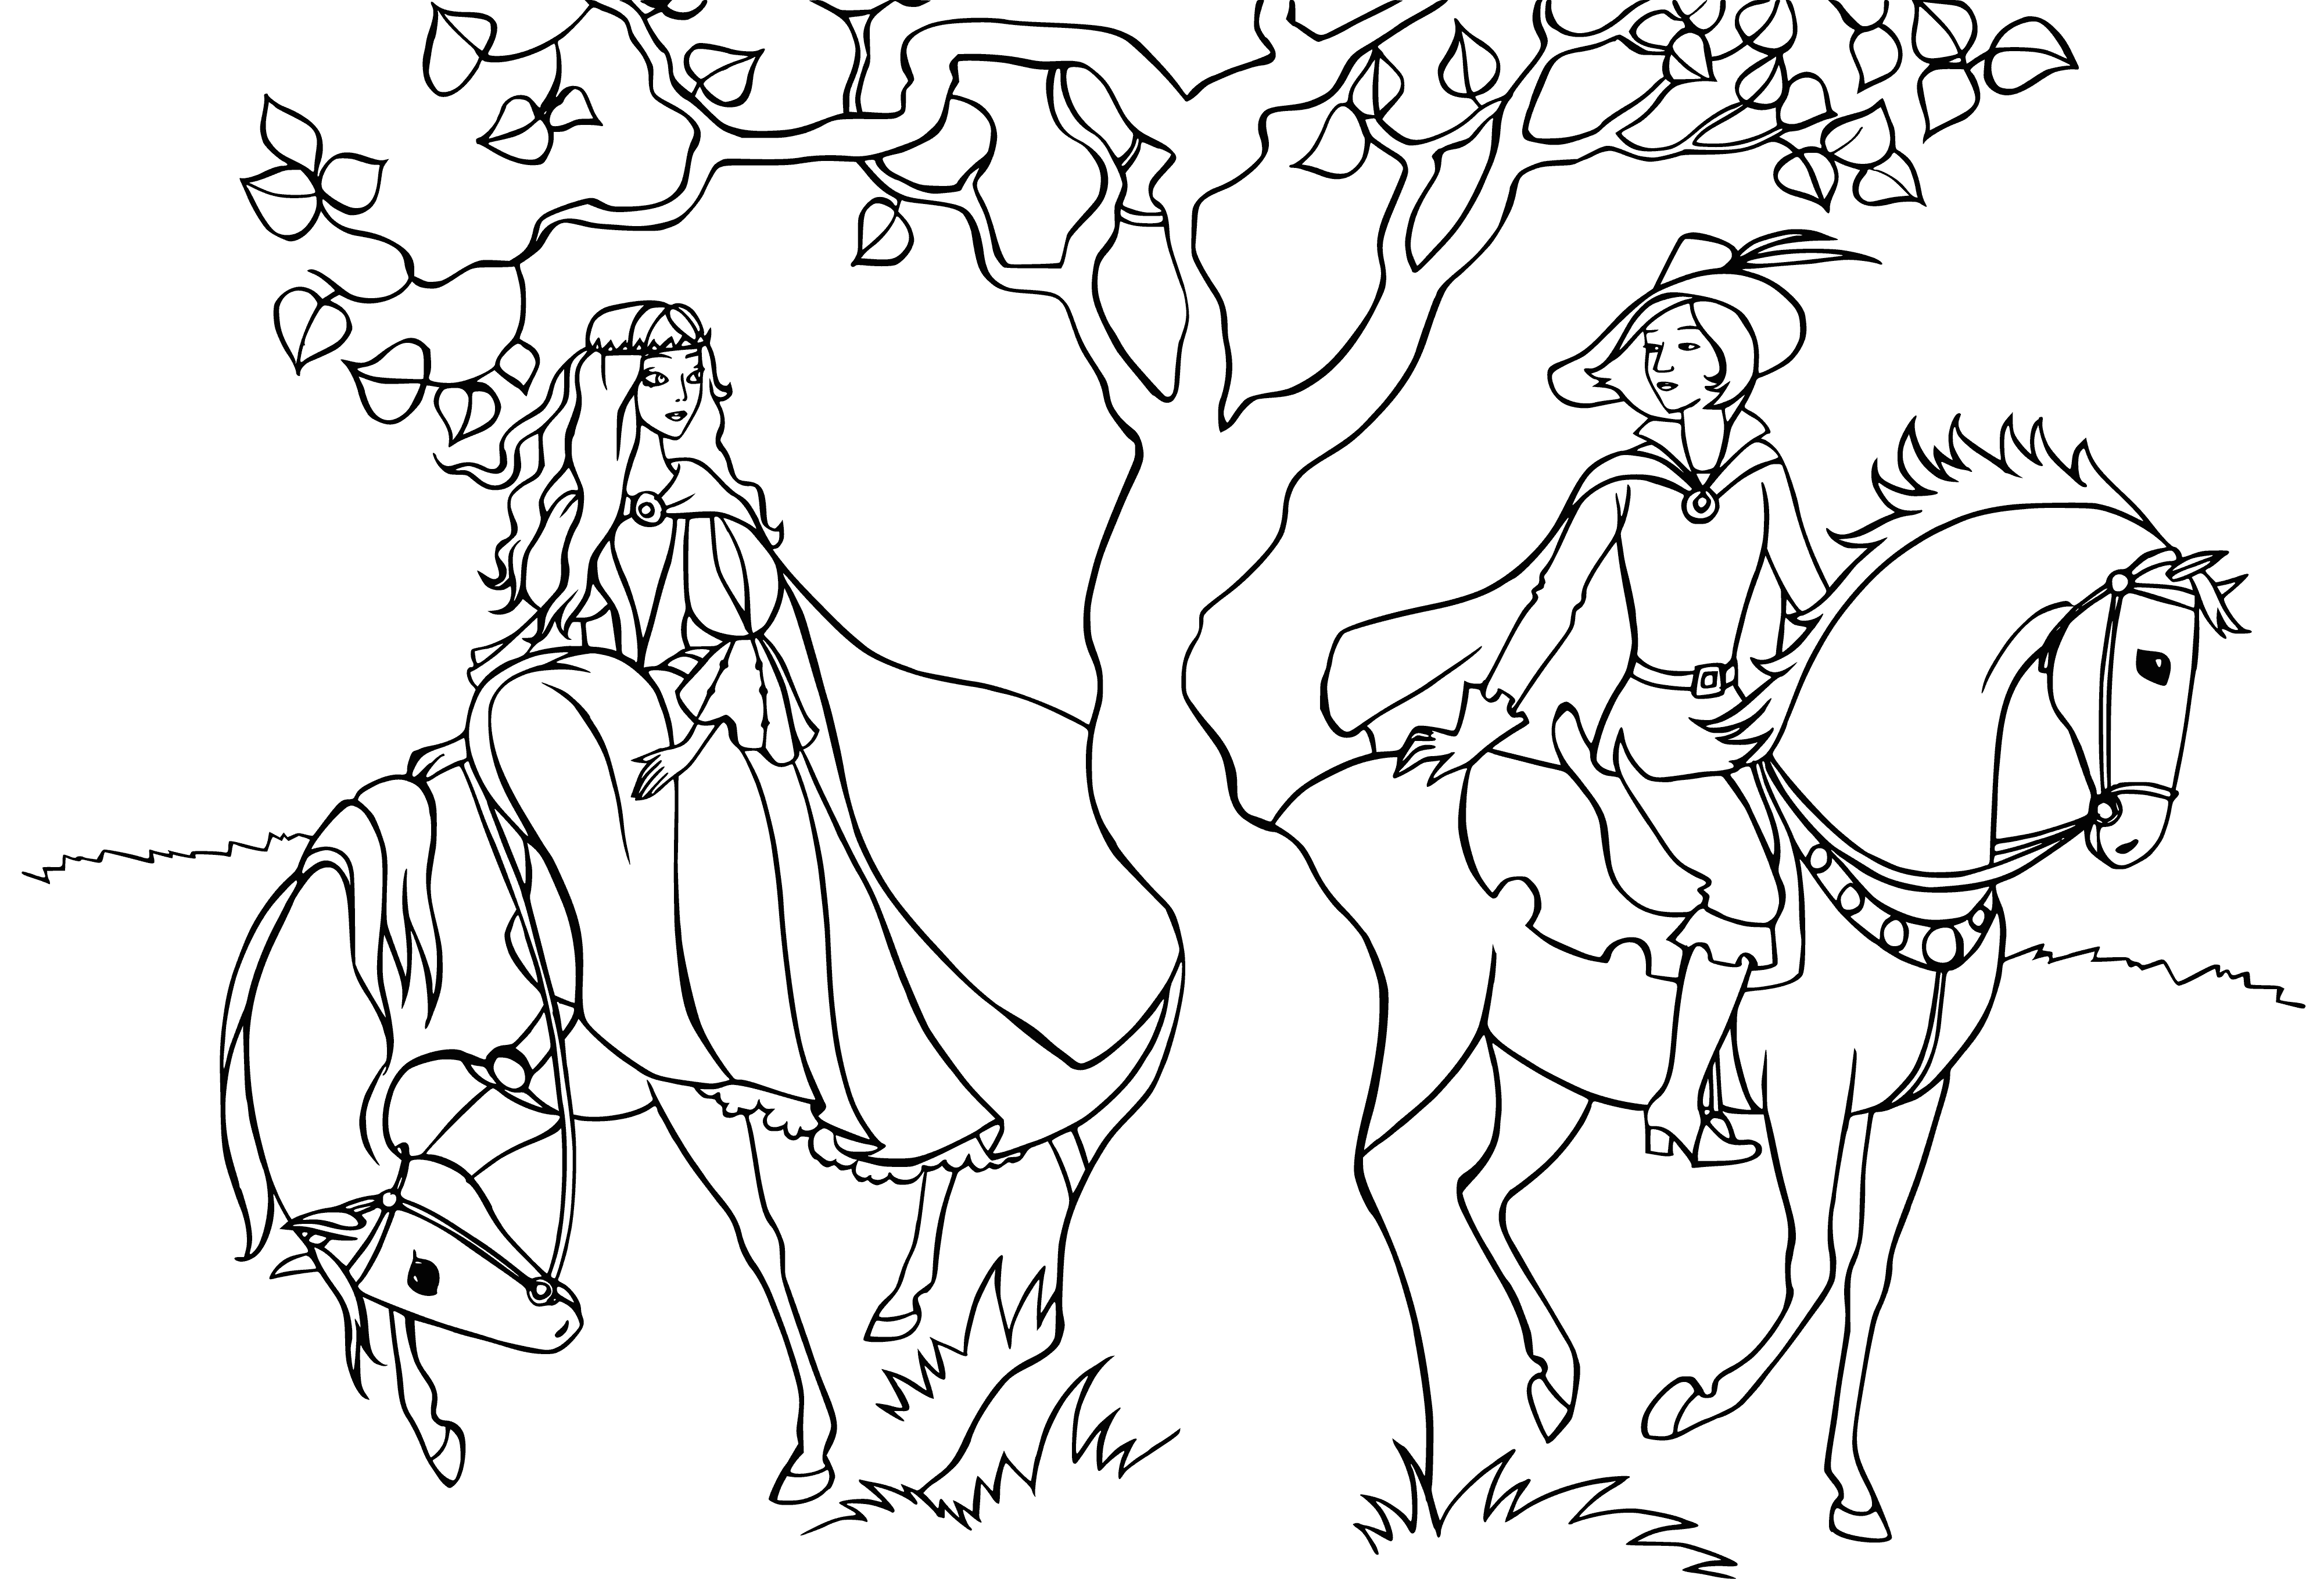 coloring page: Fairies of the Kingdom use their special powers to help the people. They are beautiful and have different colors & abilities. #FairyKingdom